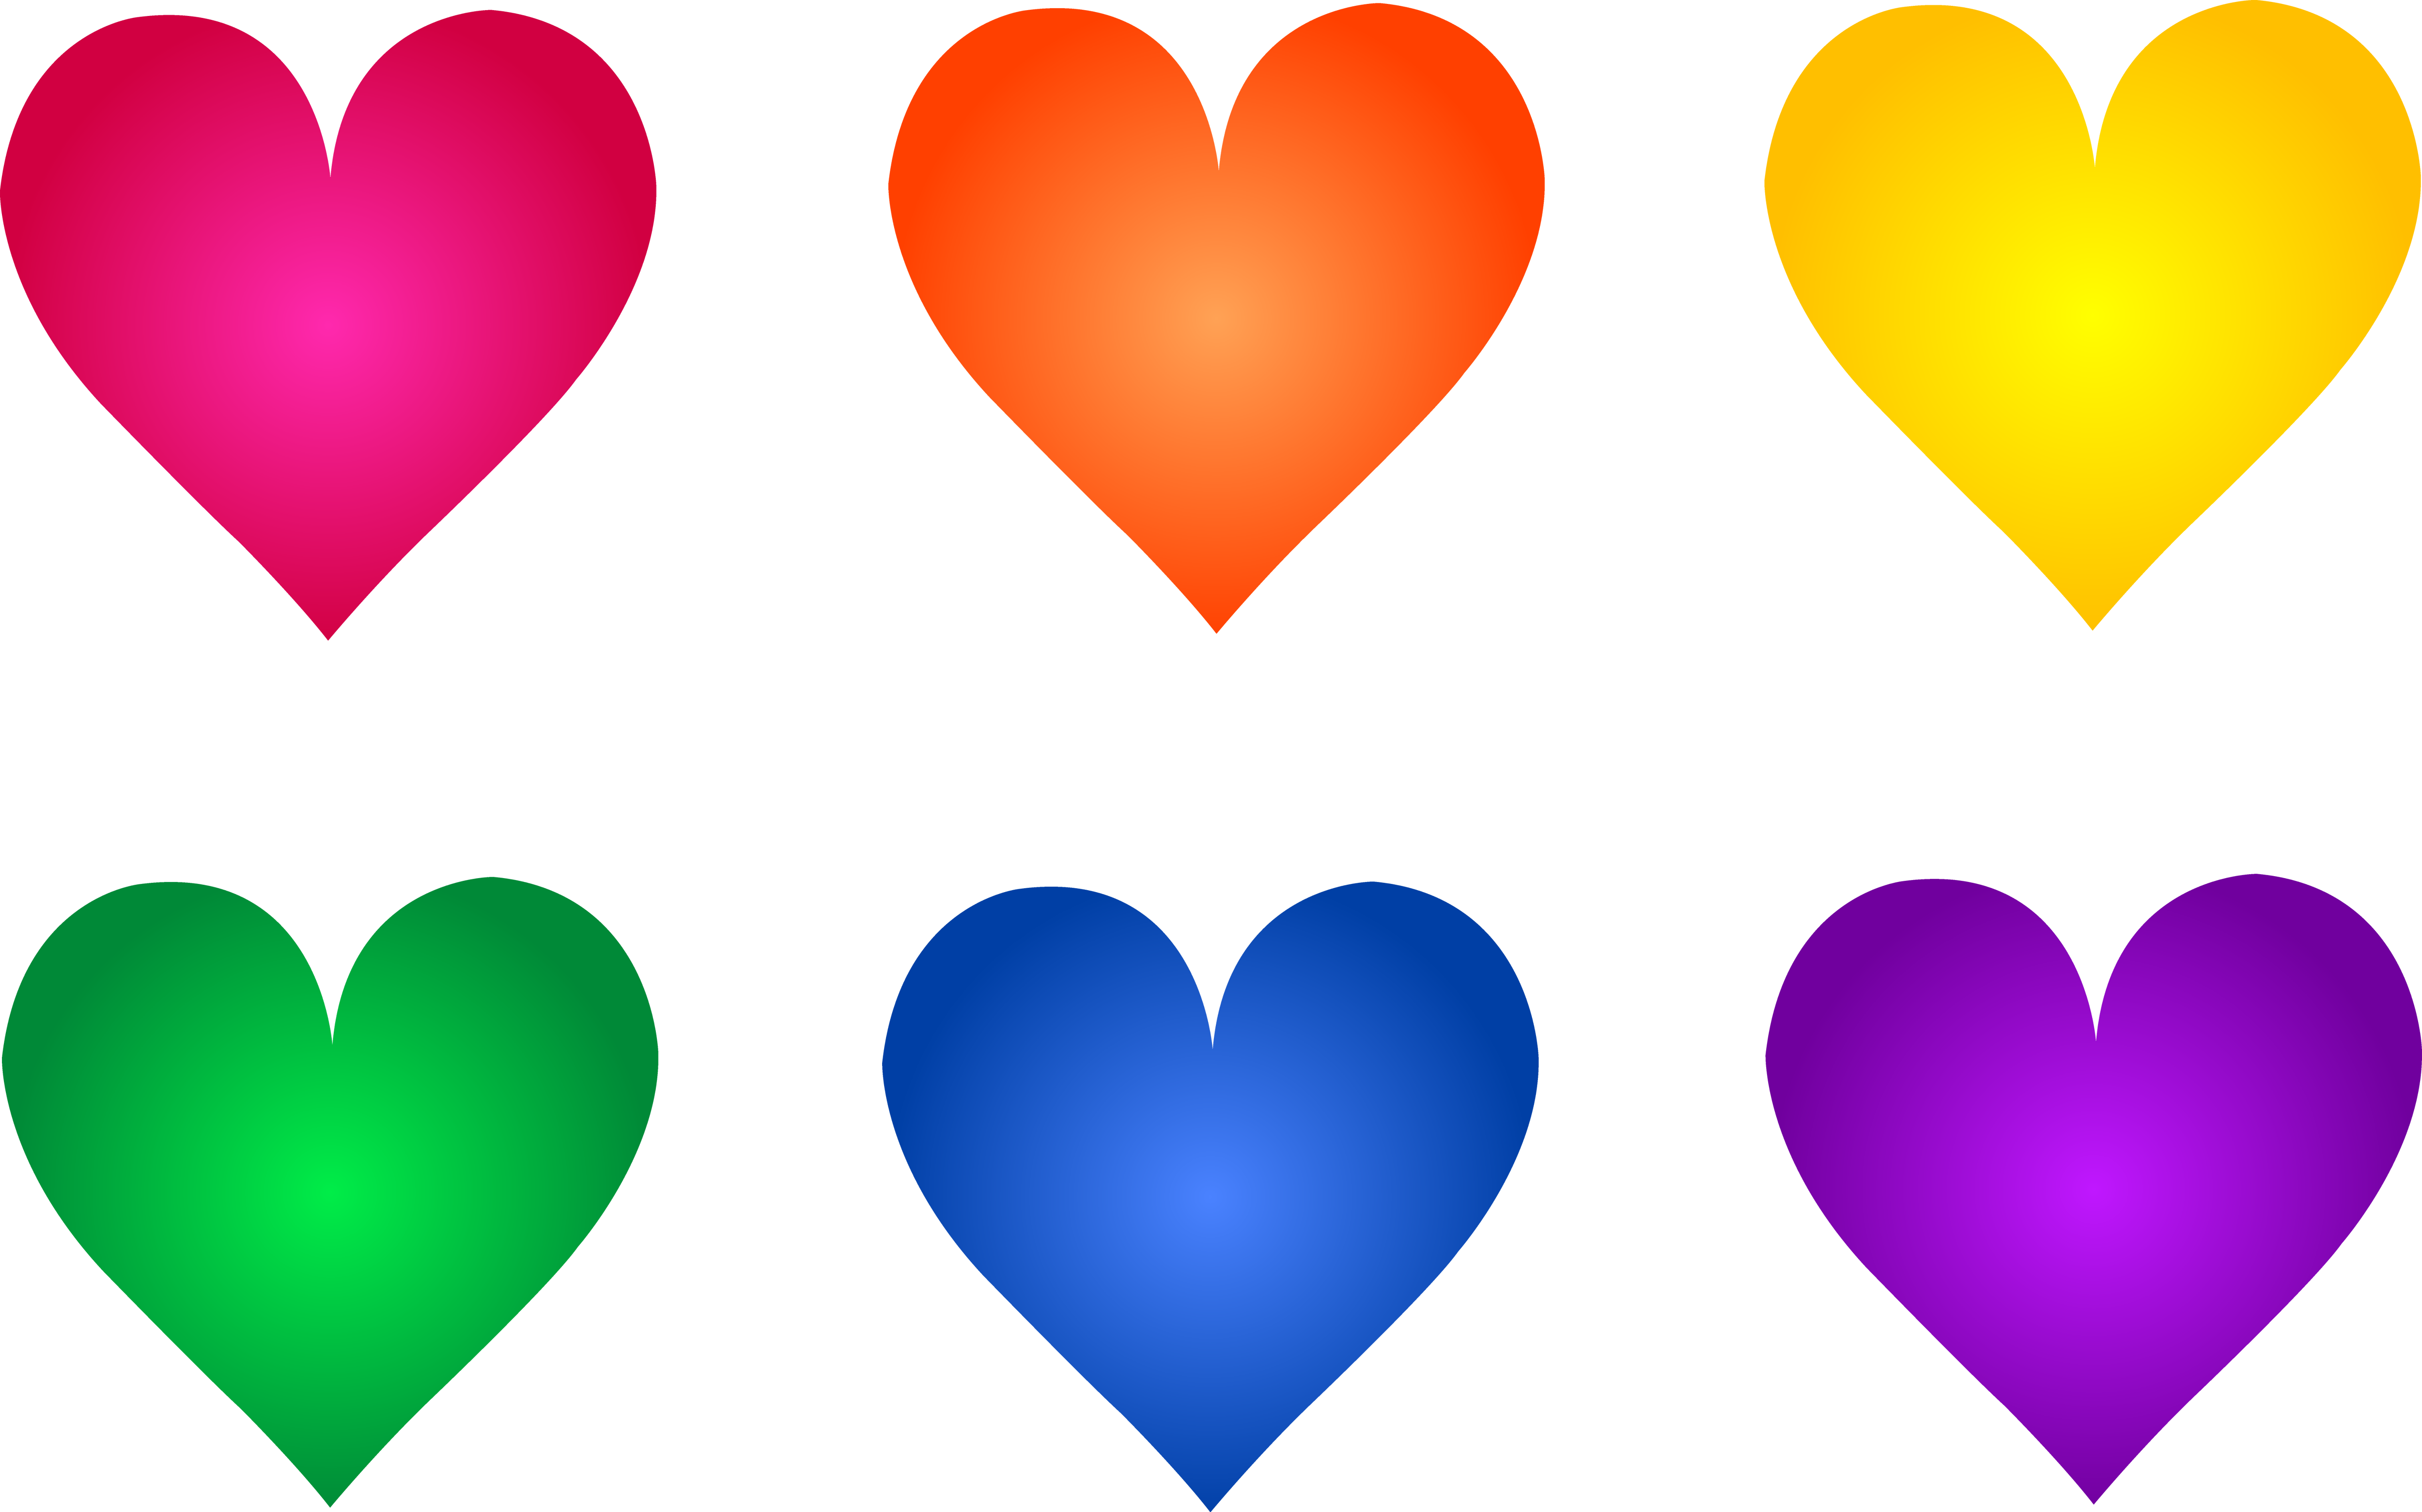 Free Hearts Image, Download Free Clip Art, Free Clip Art on.